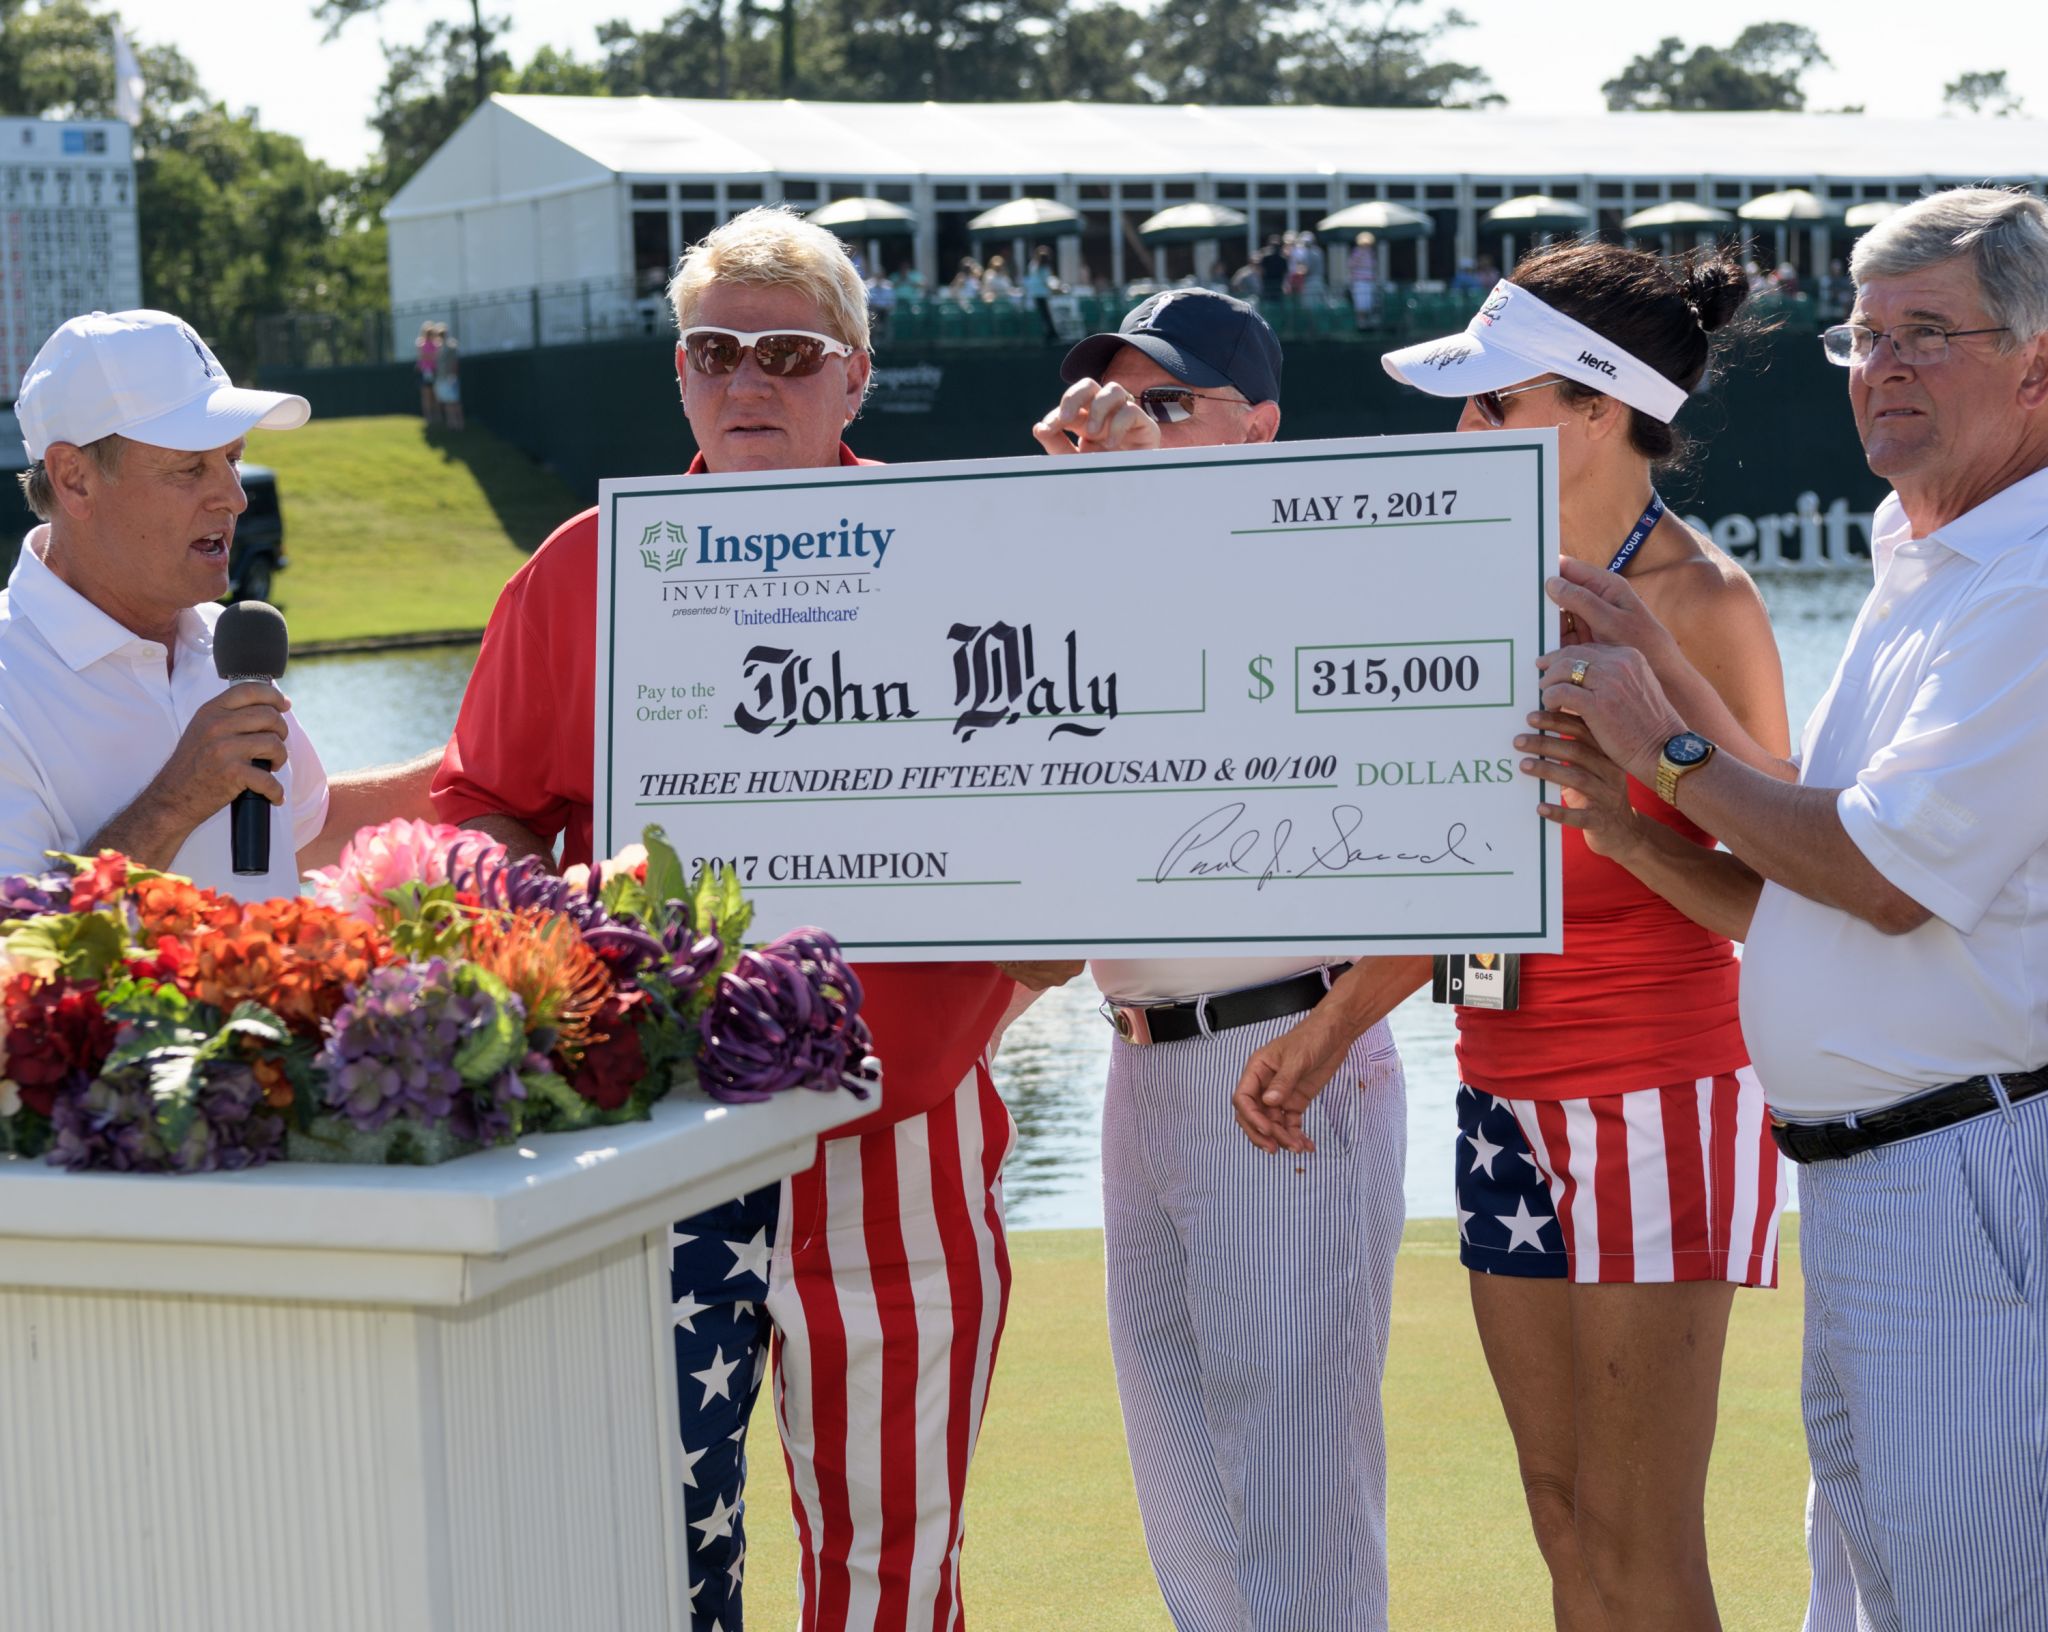 John Daly hangs on late to win Insperity Invitational